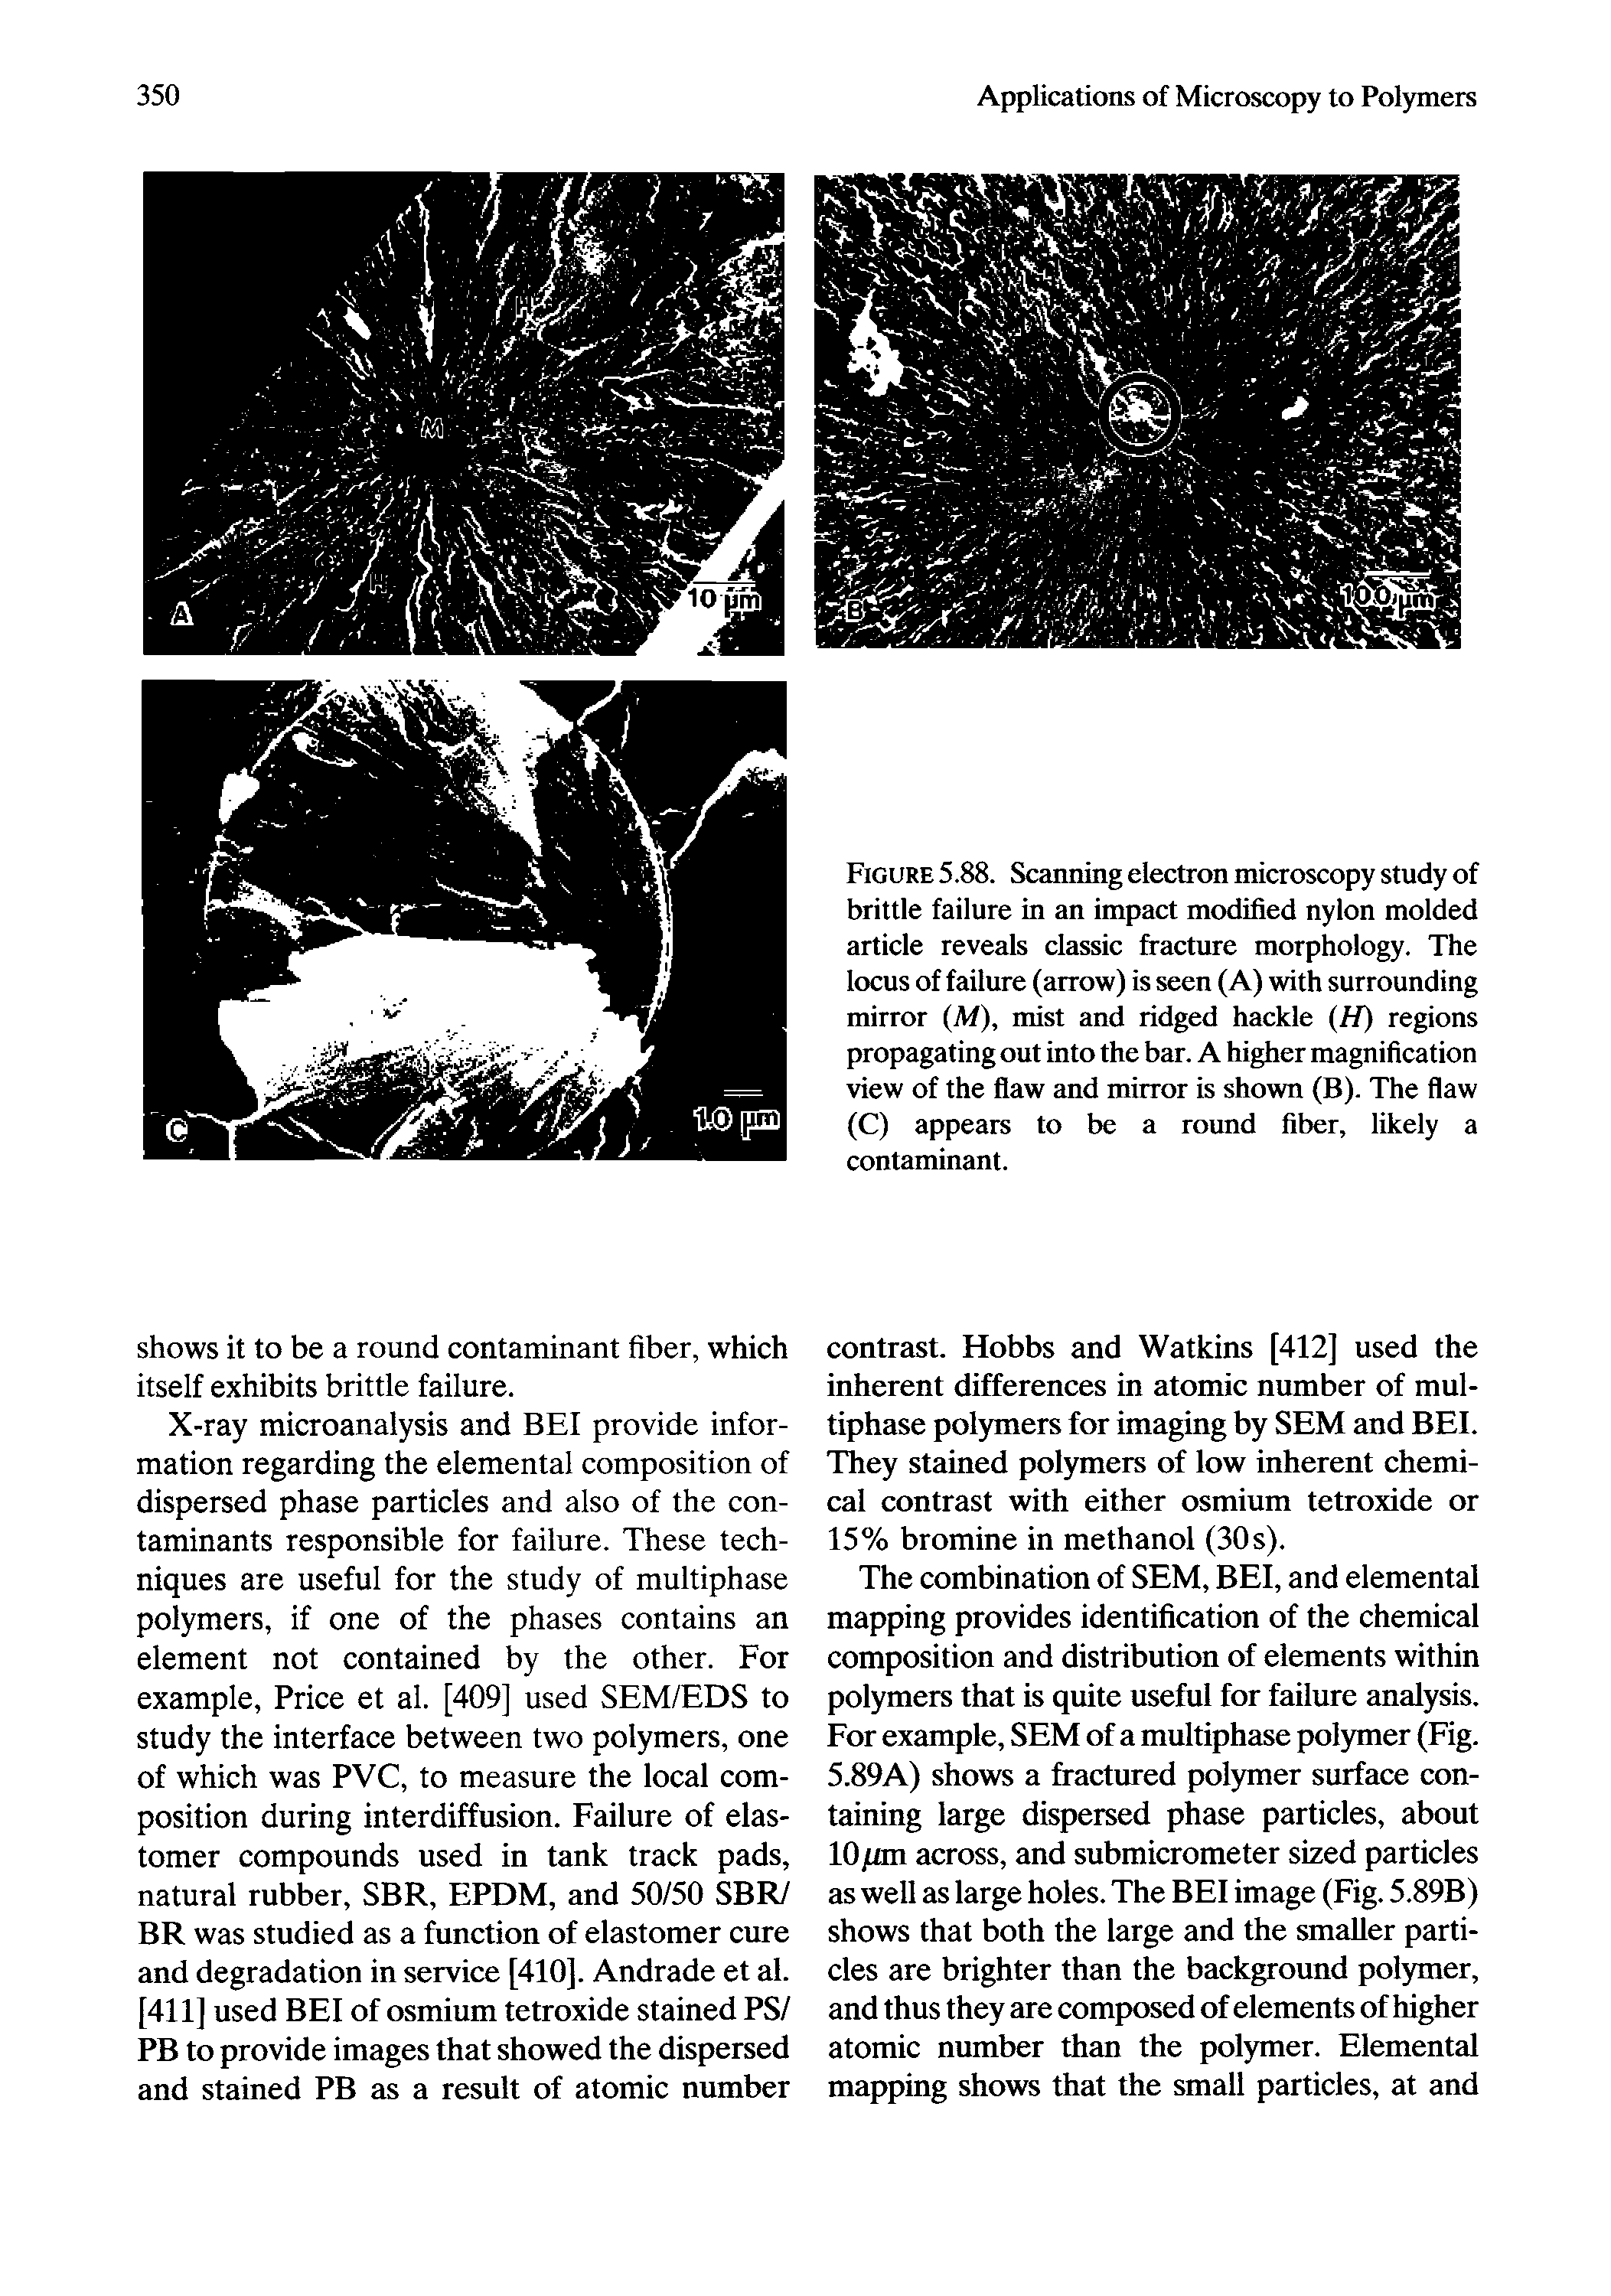 Figure 5.88. Scanning electron microscopy study of brittle failure in an impact modified nylon molded article reveals classic fracture morphology. The locus of failure (arrow) is seen (A) with surrounding mirror (M), mist and ridged hackle (H) regions propagating out into the bar. A higher magnification view of the flaw and mirror is shown (B). The flaw (C) appears to be a round fiber, likely a contaminant.